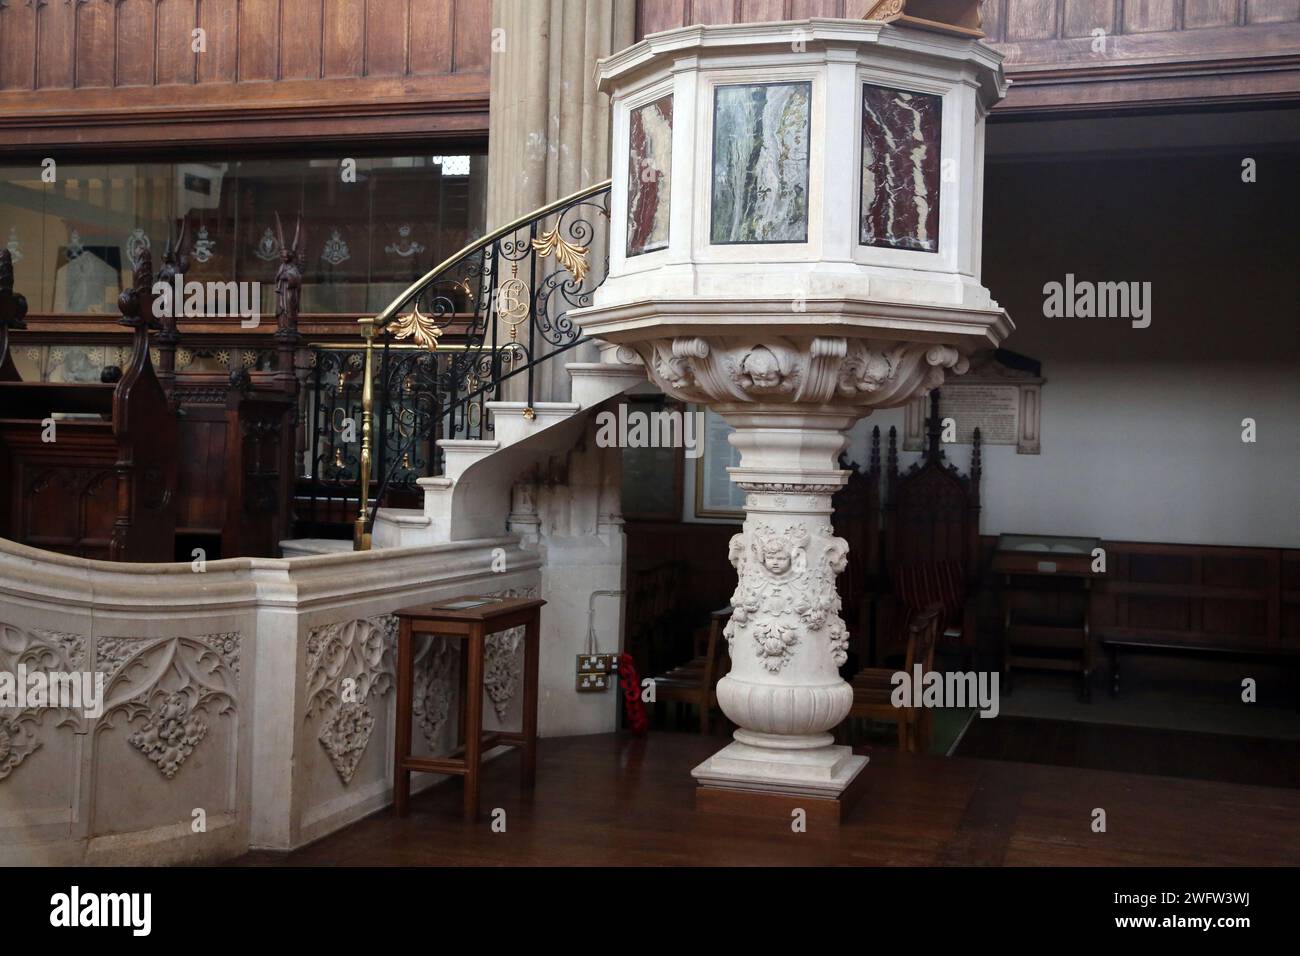 St Luke's Church Interior showing Pulpit with Marble Panelling Sydney Street Chelsea London England Stock Photo